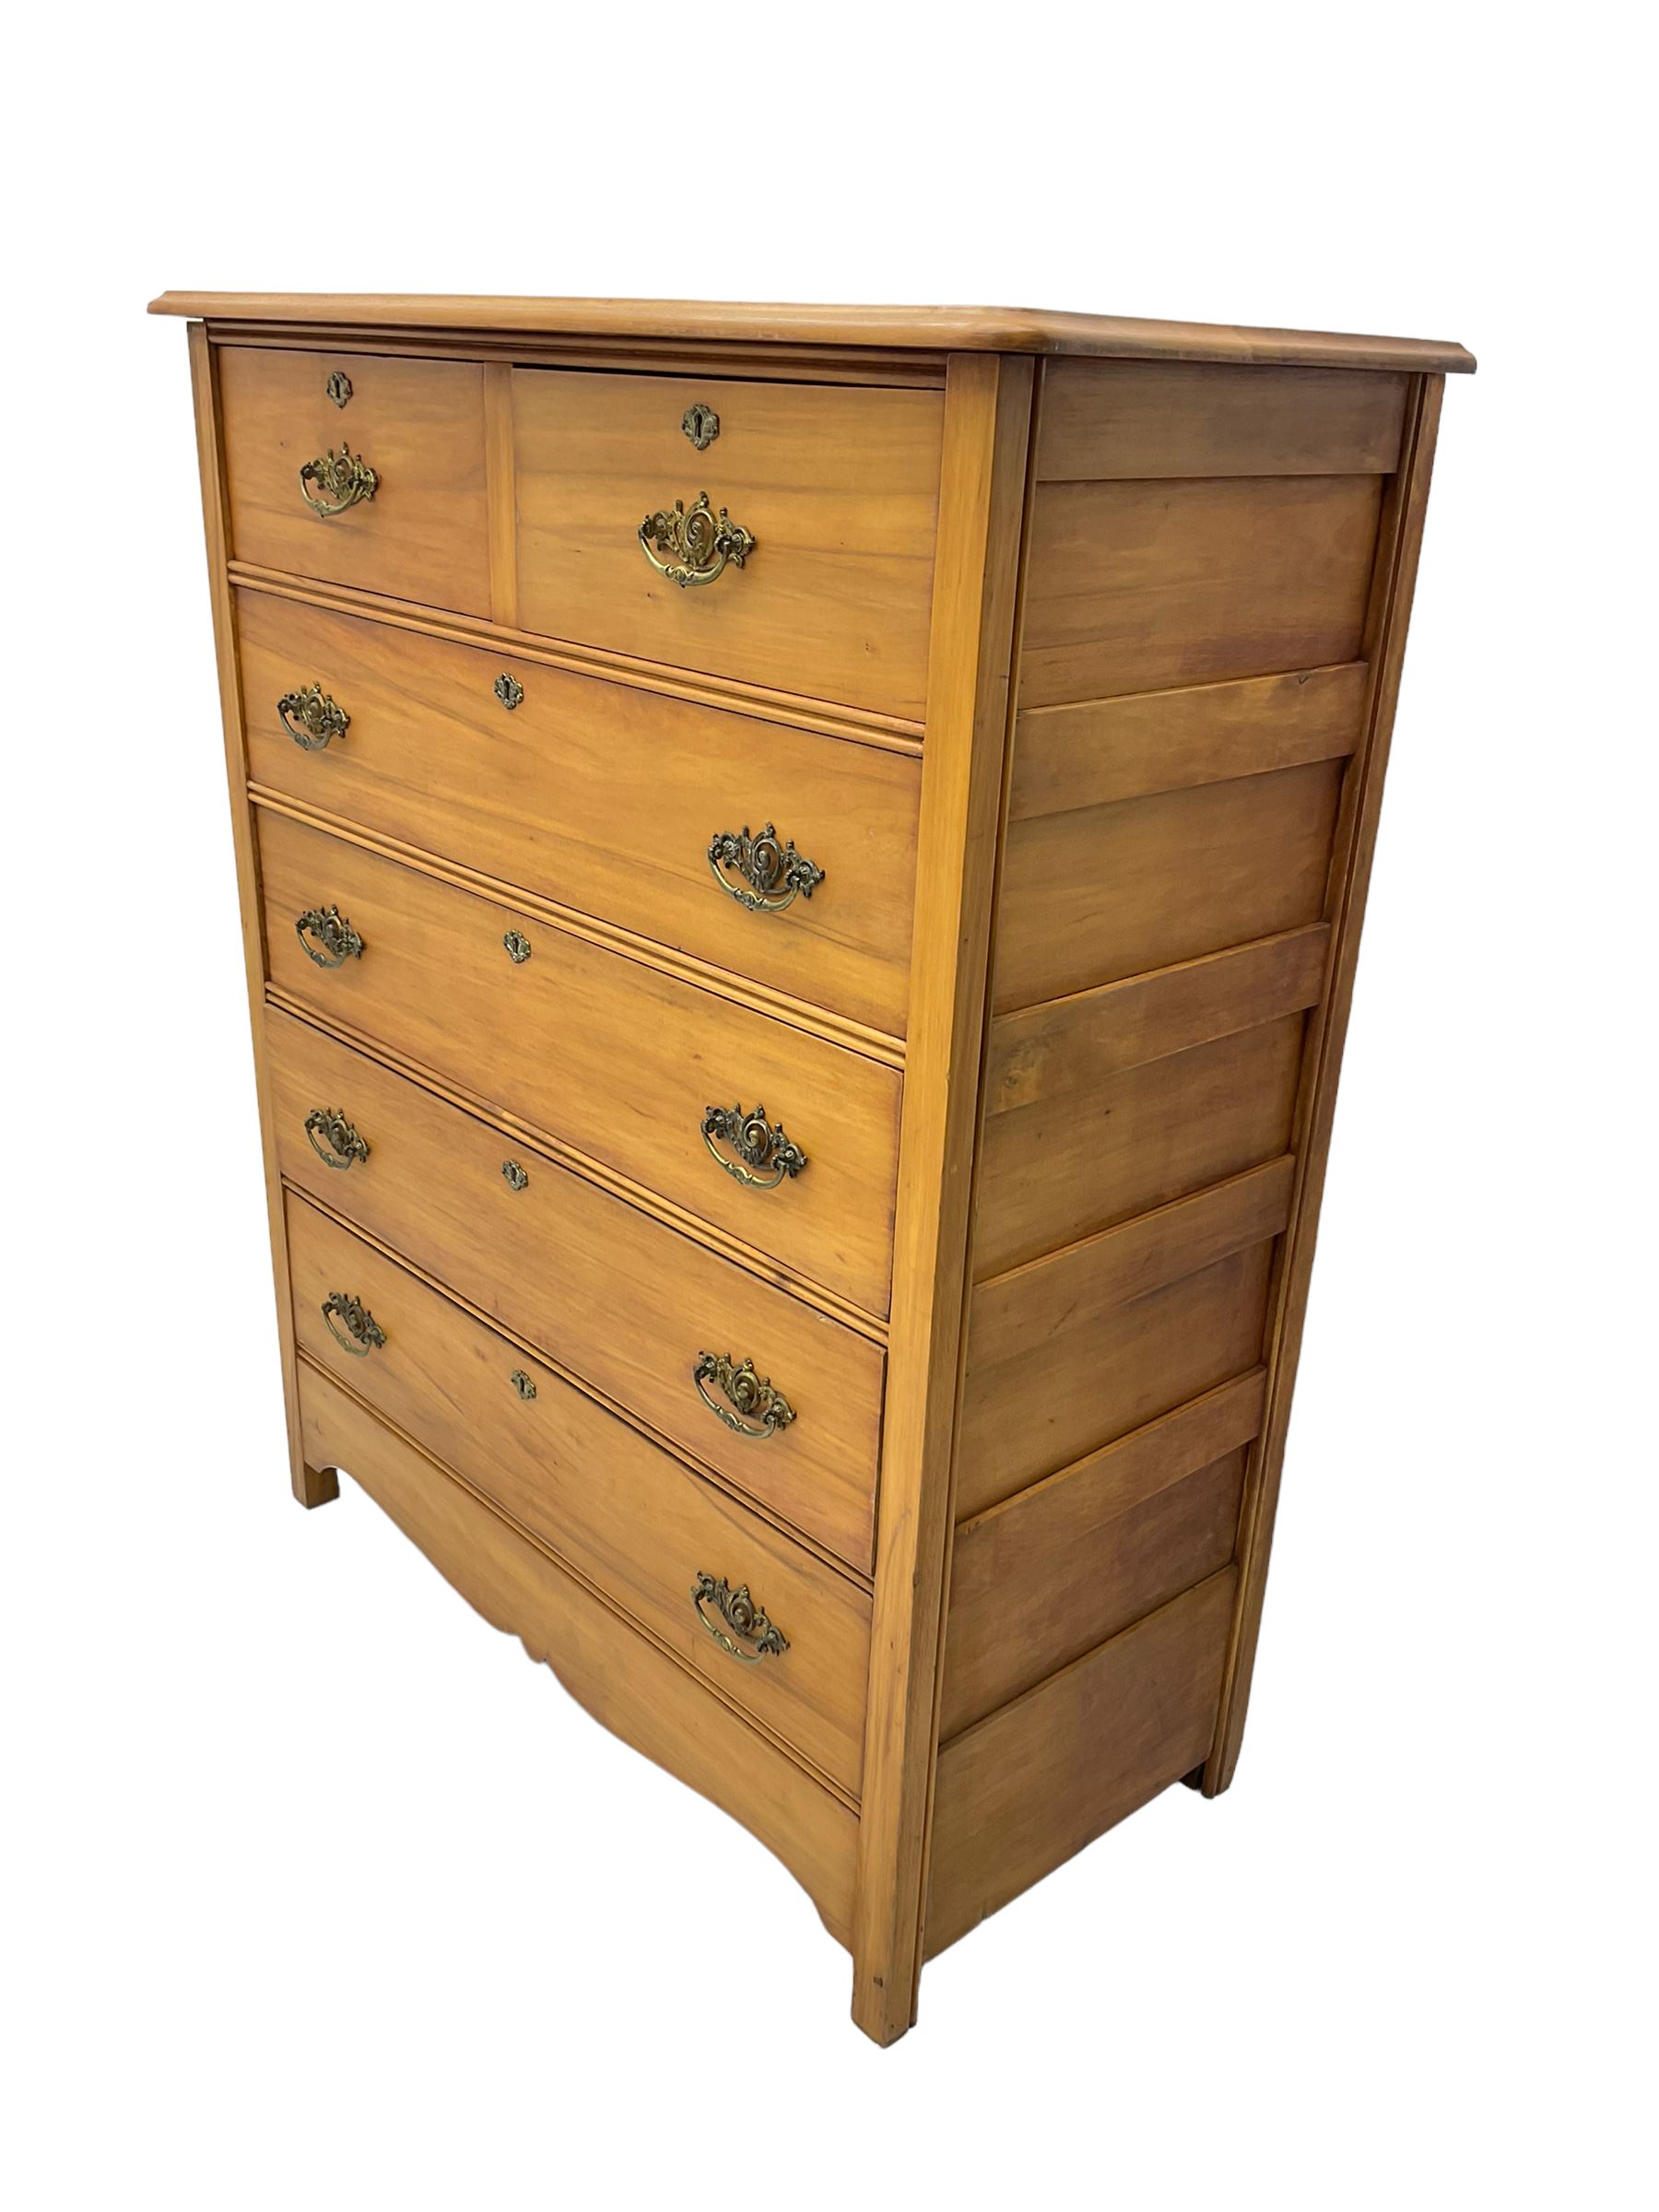 Late Victorian satin walnut chest - Image 5 of 5